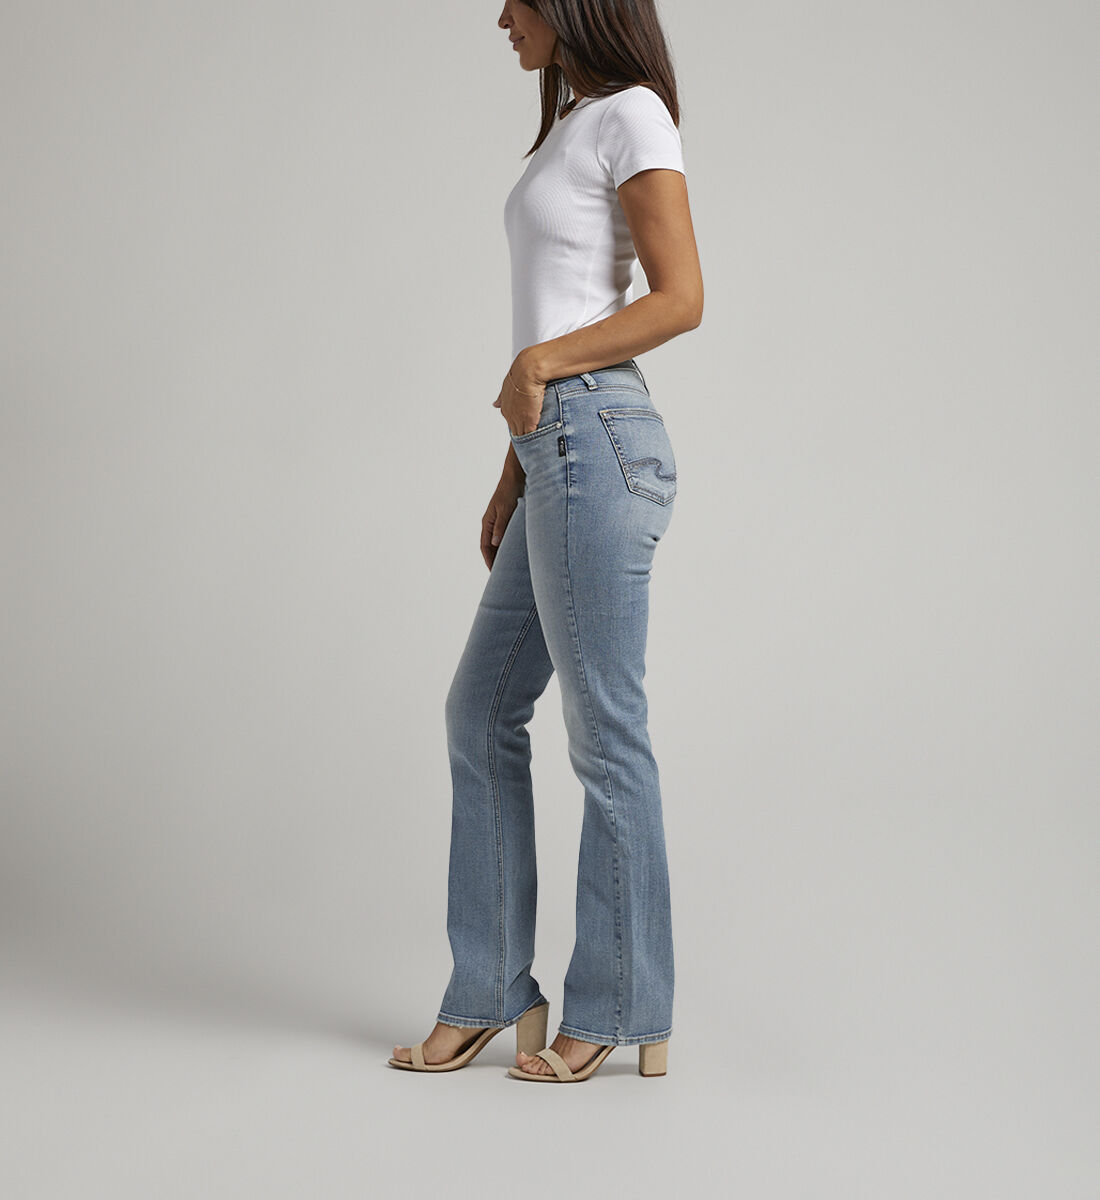 Find Out Which Flared Jeans Work Best for Your Body Shape - Verily